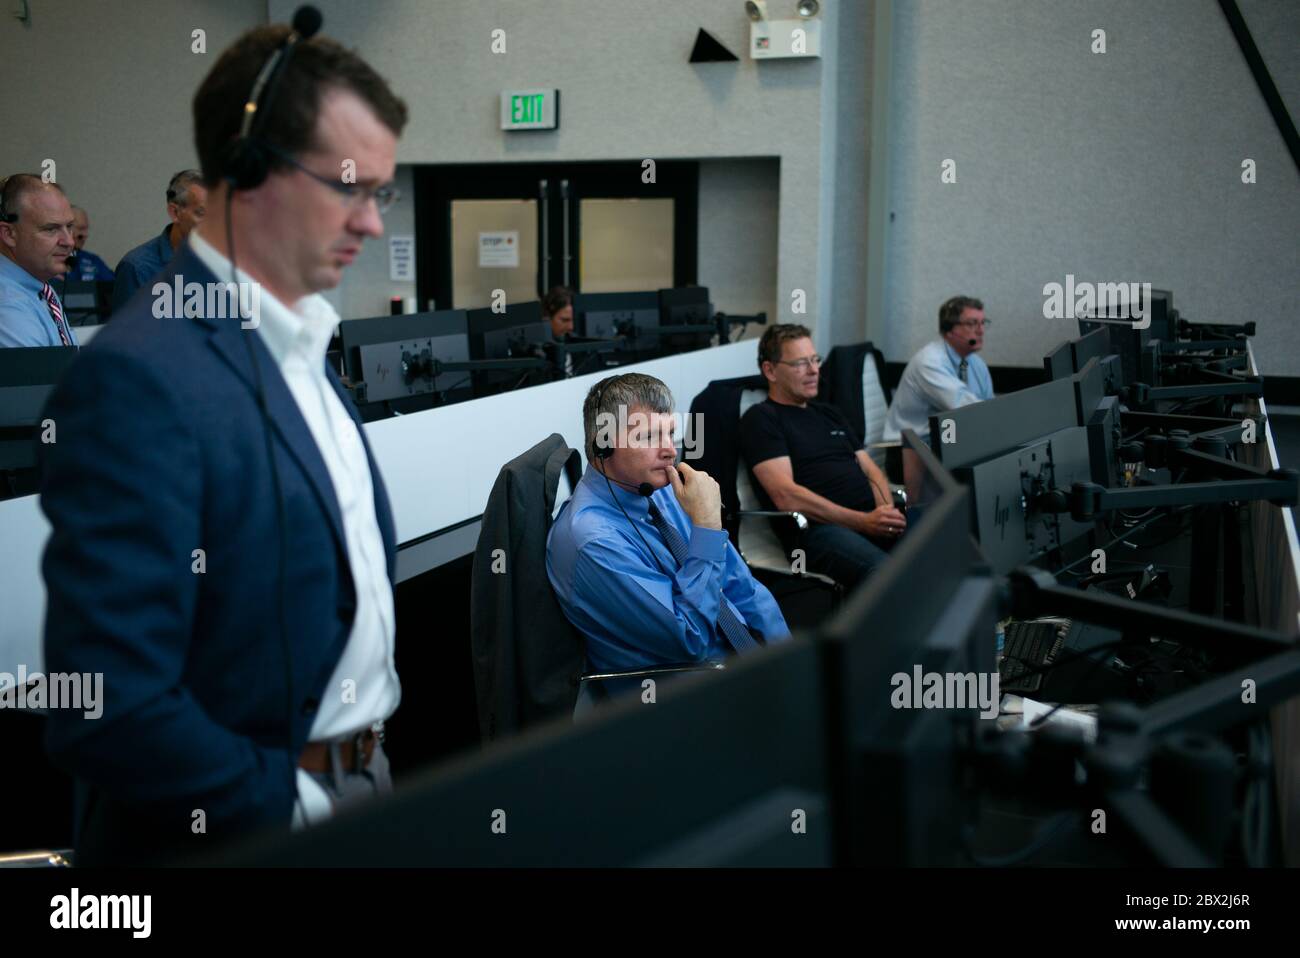 Steve Stich, deputy manager of the NASA Commercial Crew Program, monitors the launch of a SpaceX Falcon 9 rocket carrying the company's Crew Dragon spacecraft on the Demo-2 mission with NASA astronauts Douglas Hurley and Robert Behnken onboard, Saturday, May 30, 2020, in  firing room four of the Launch Control Center at NASA’s Kennedy Space Center in Florida. NASA’s SpaceX Demo-2 mission is the first launch with astronauts of the SpaceX Crew Dragon spacecraft and Falcon 9 rocket to the International Space Station as part of the agency’s Commercial Crew Program. The test flight serves as an end Stock Photo